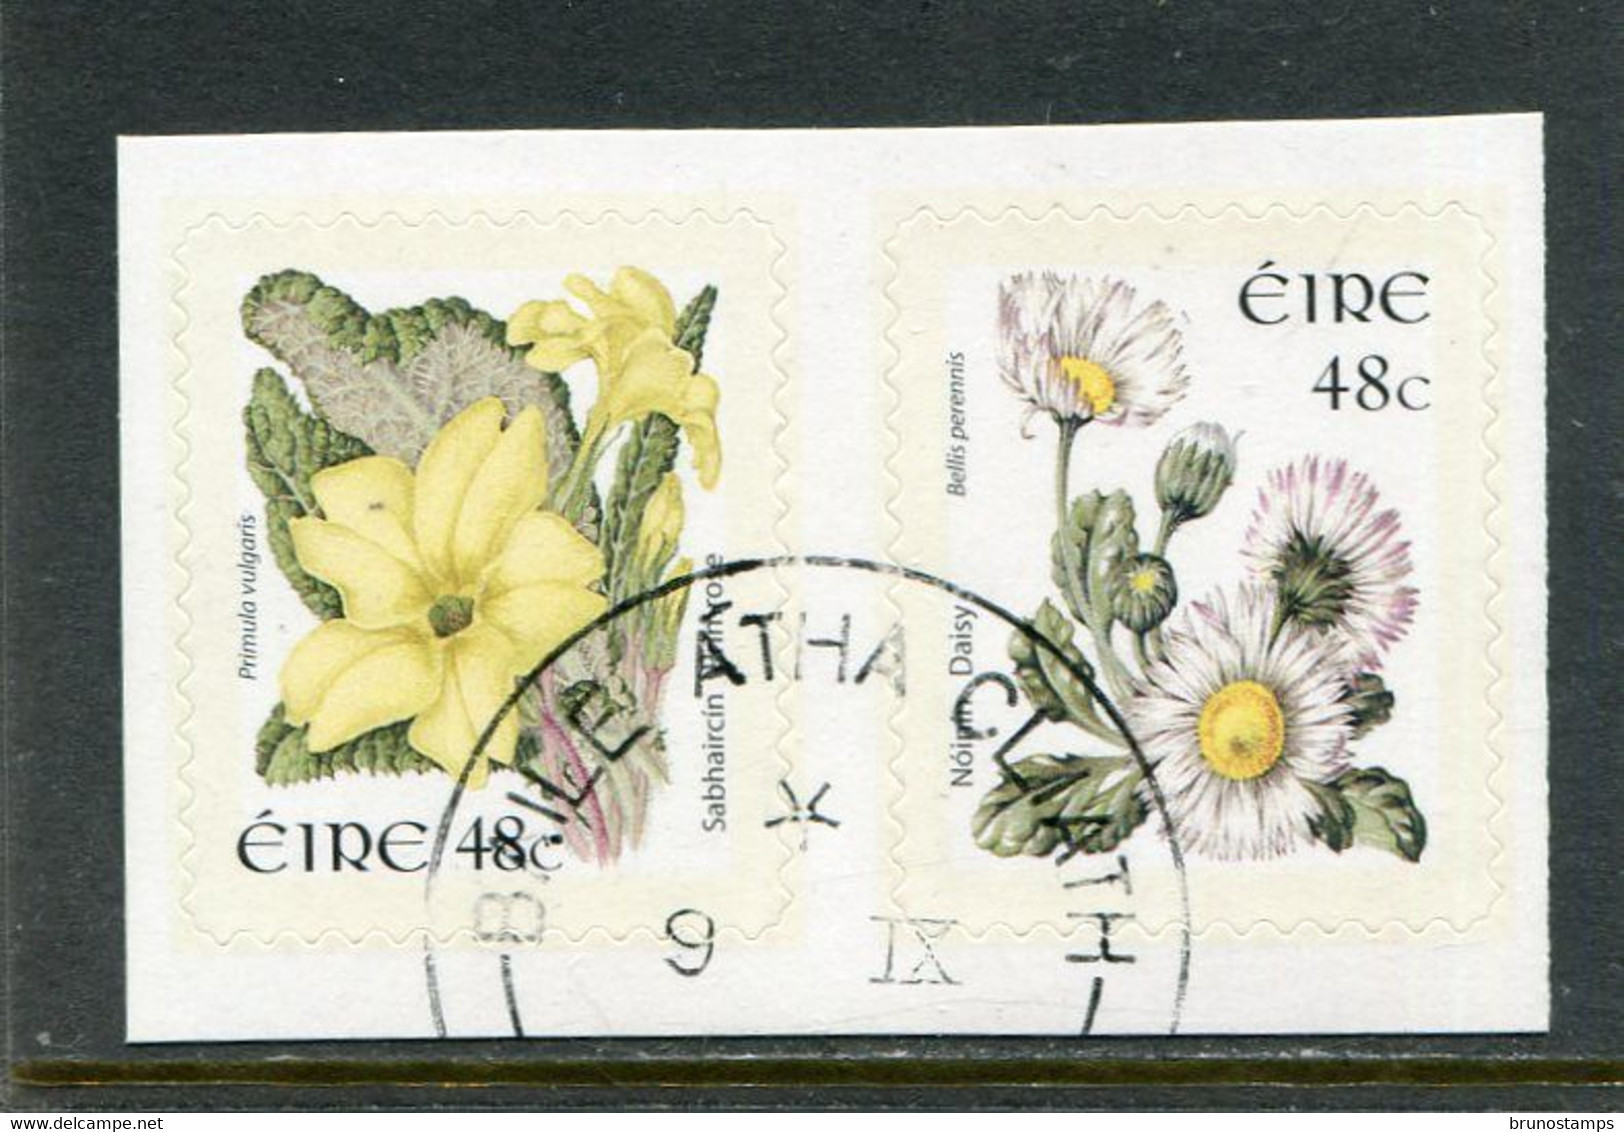 IRELAND/EIRE - 2004  48c  FLOWERS  SELF ADHESIVE  SET  EX BOOKLET  FINE USED - Used Stamps